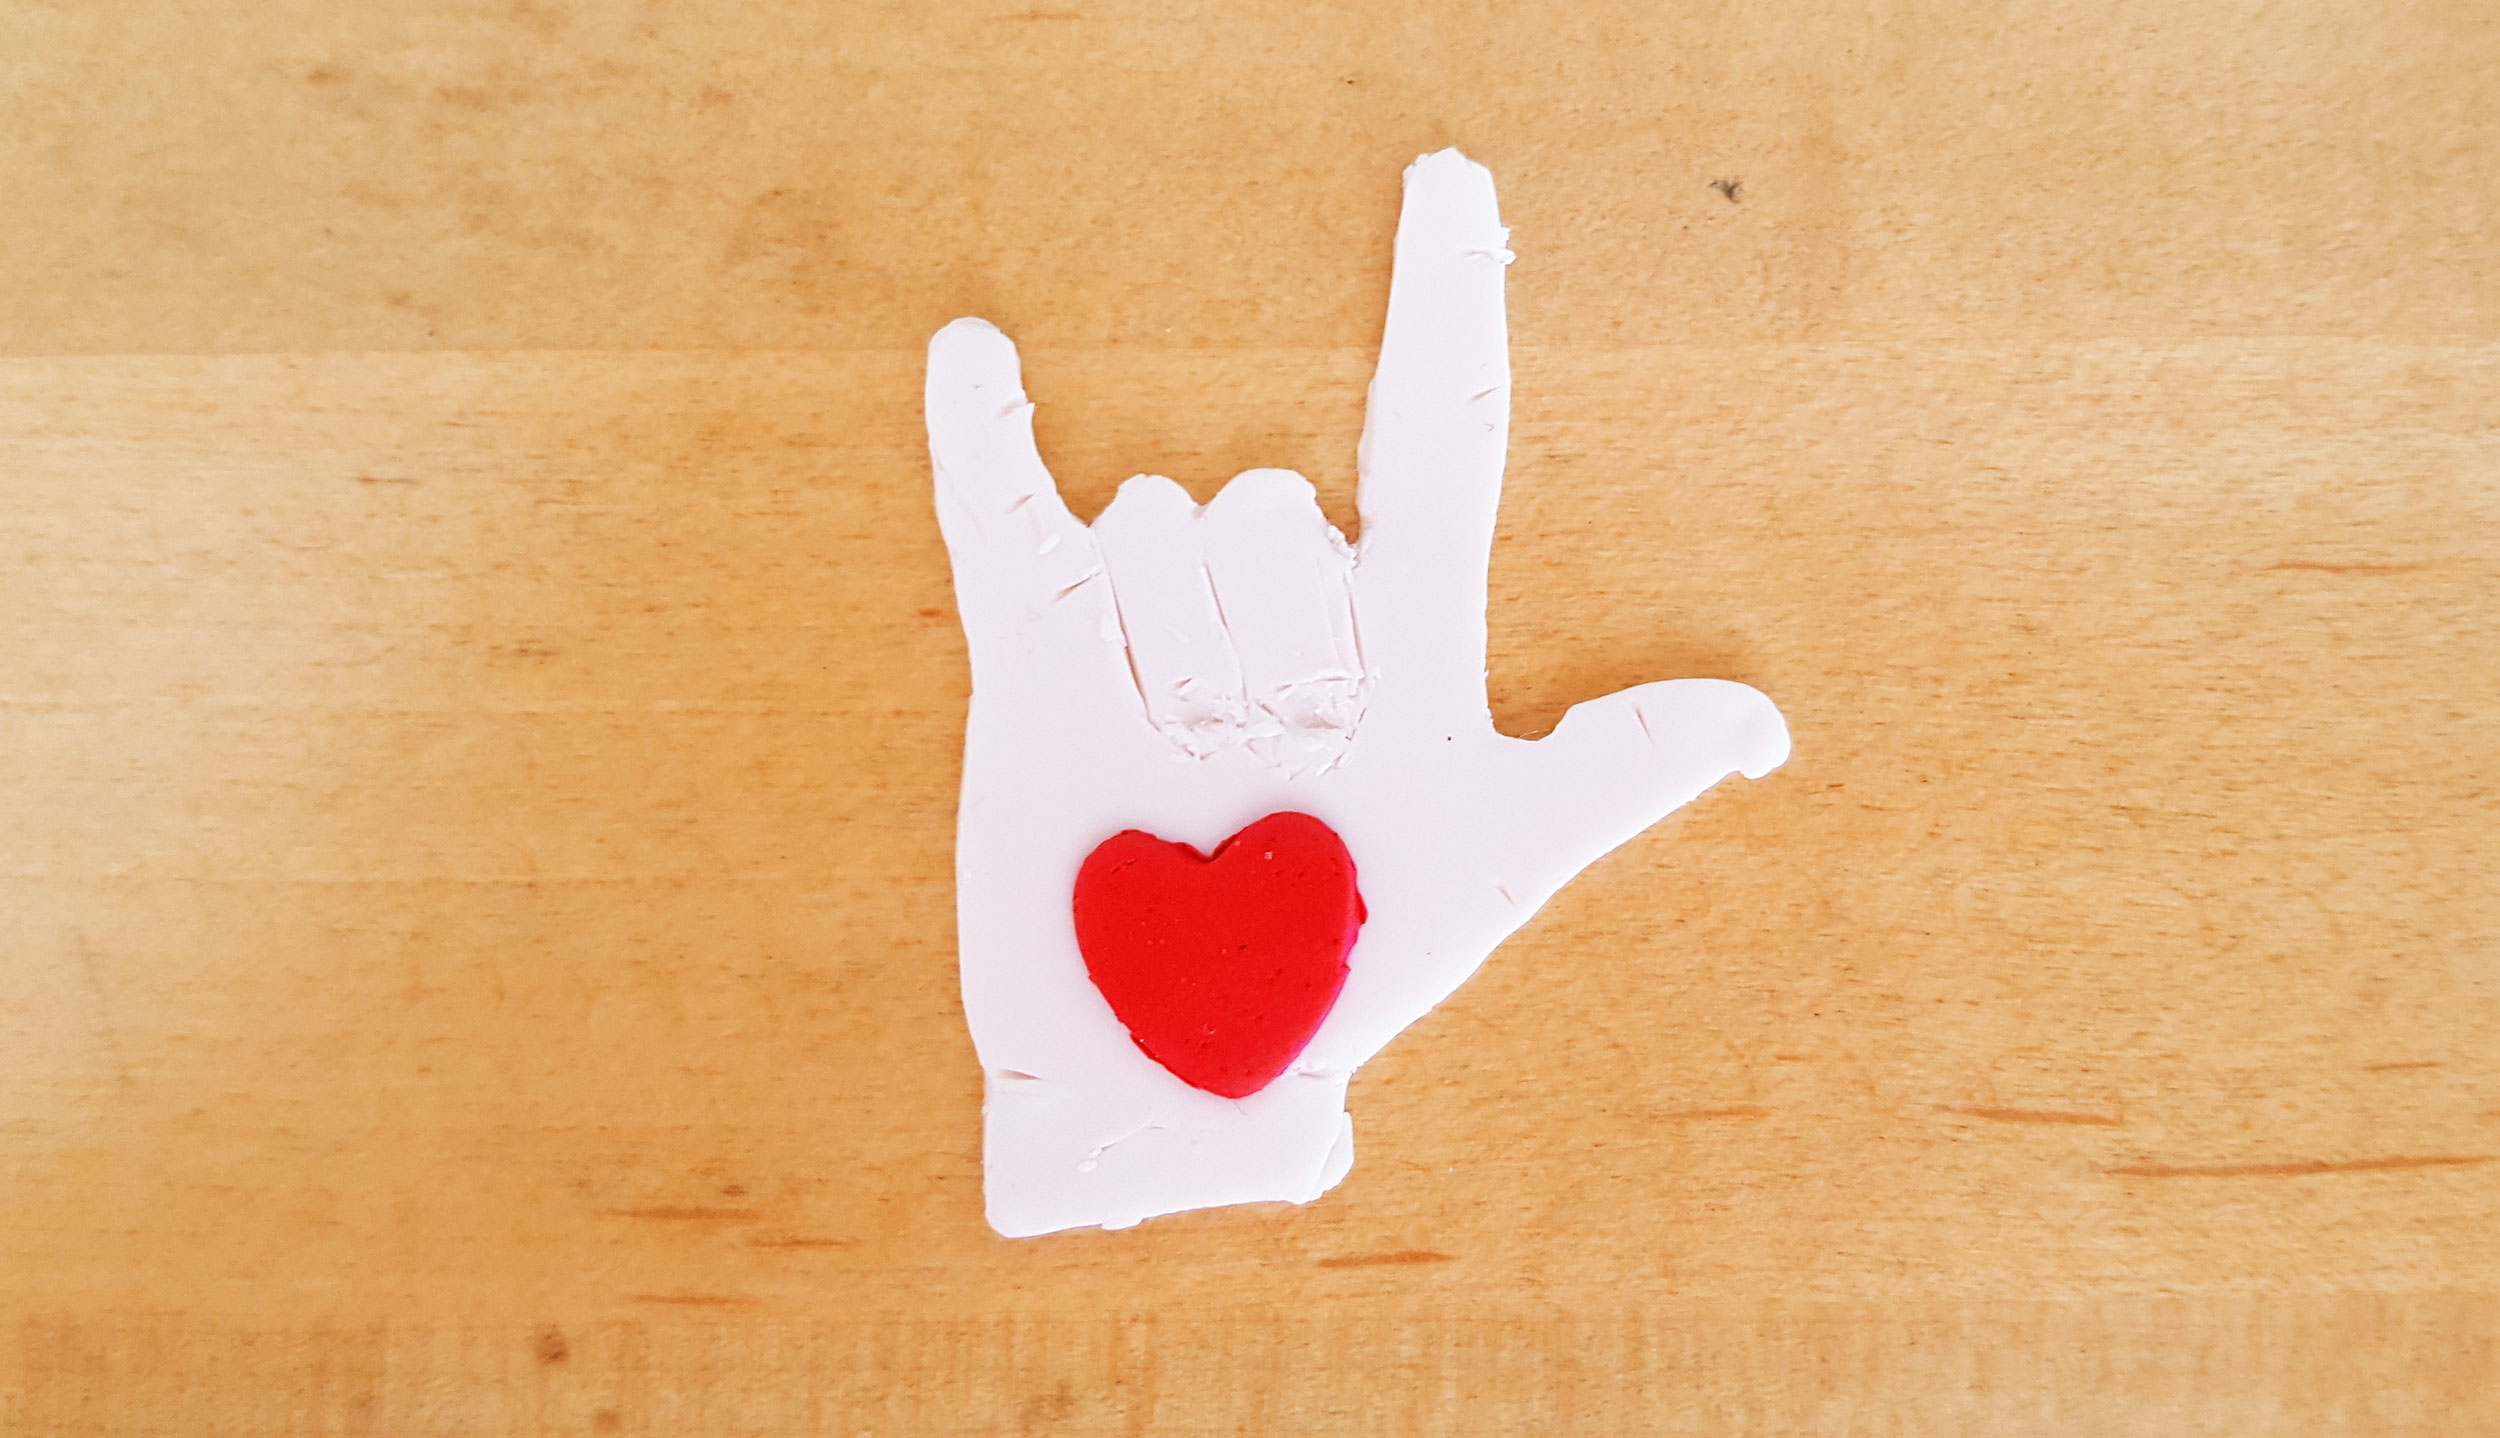 Red heart on clay "rock out" hand| OrnamentShop.com